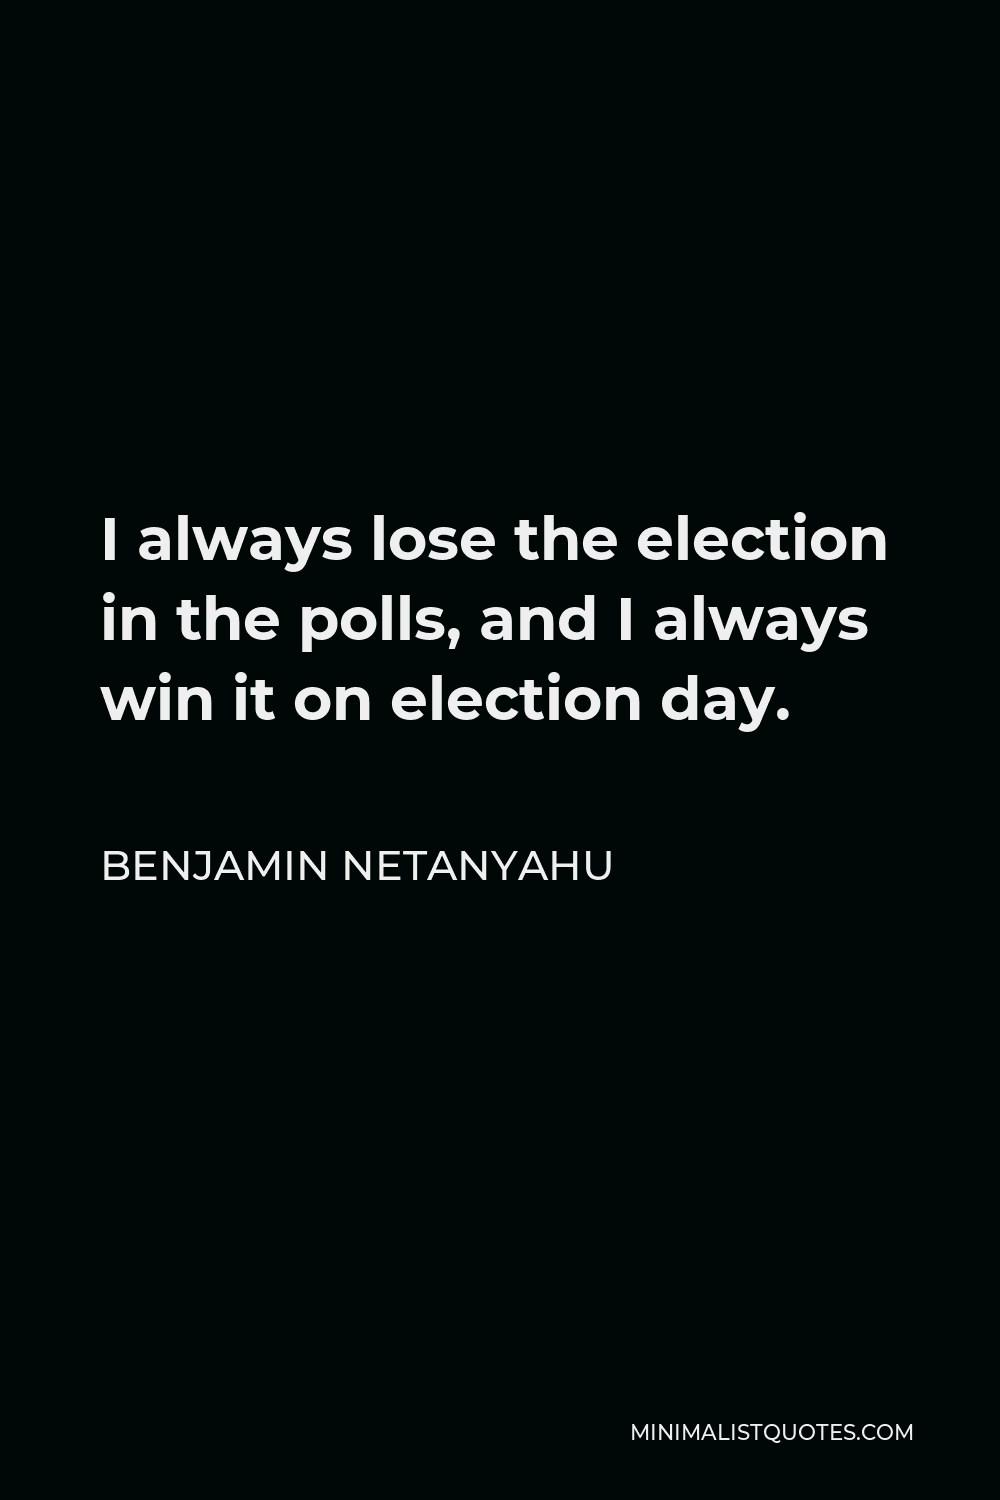 Benjamin Netanyahu Quote - I always lose the election in the polls, and I always win it on election day.